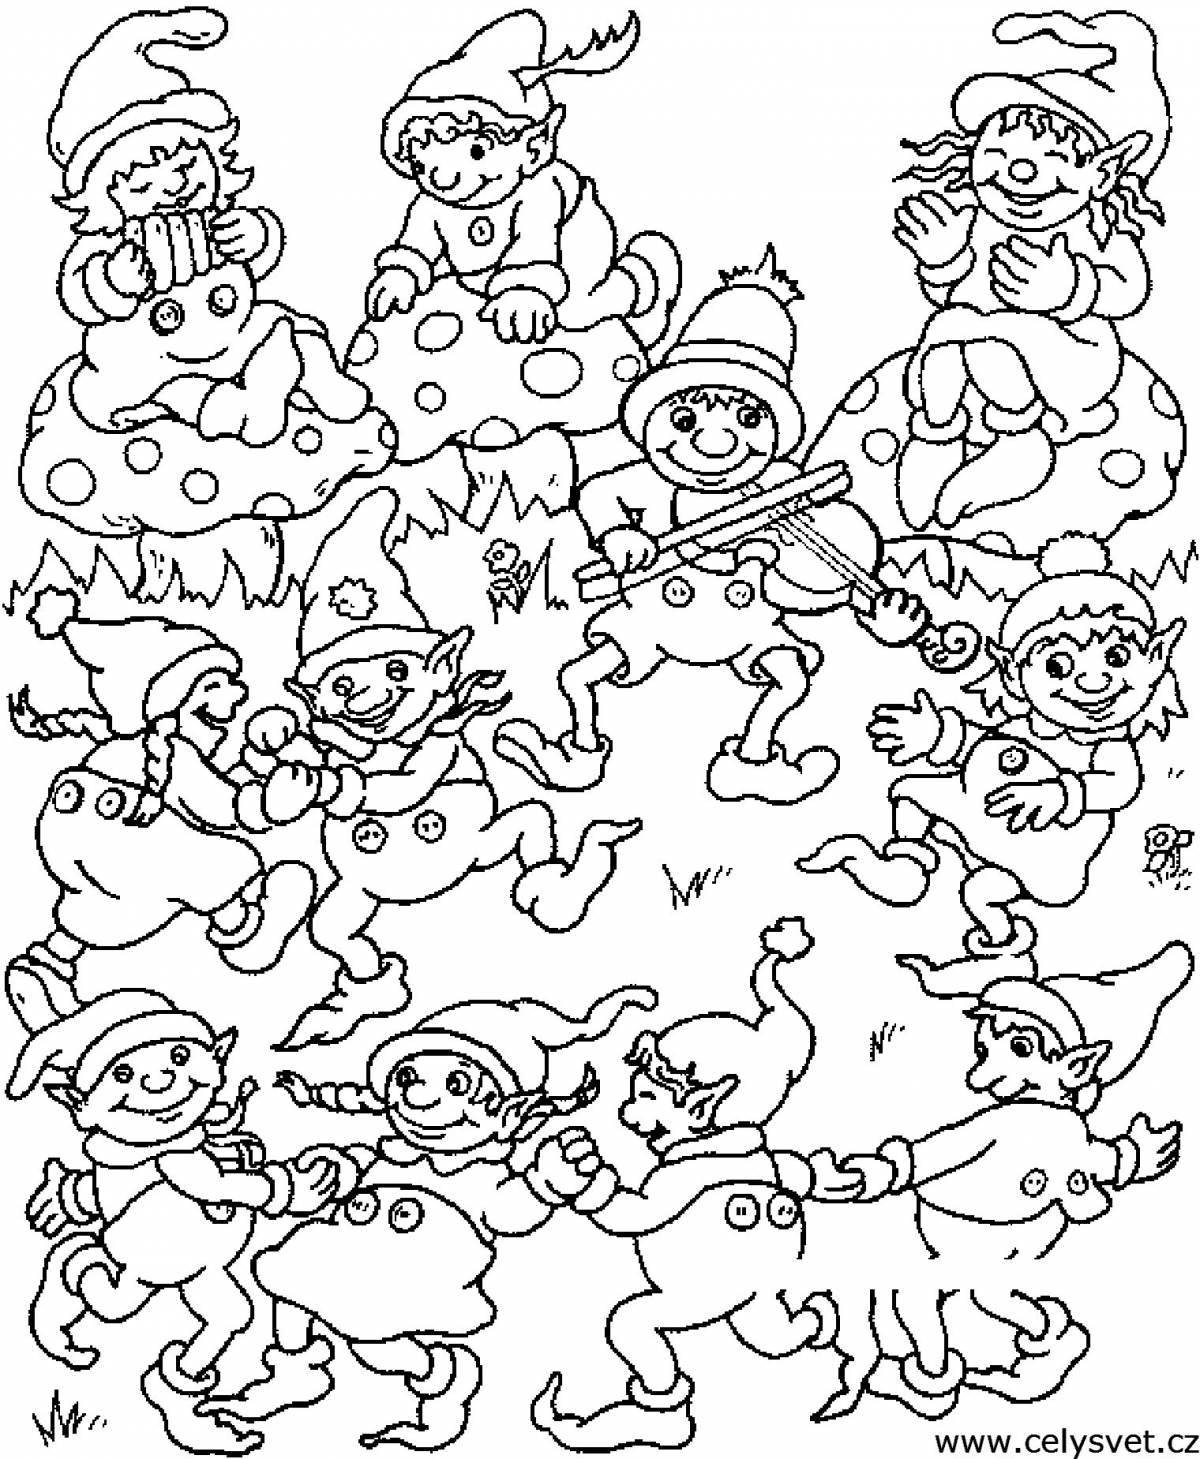 Coloring book joyful dwarf for the new year